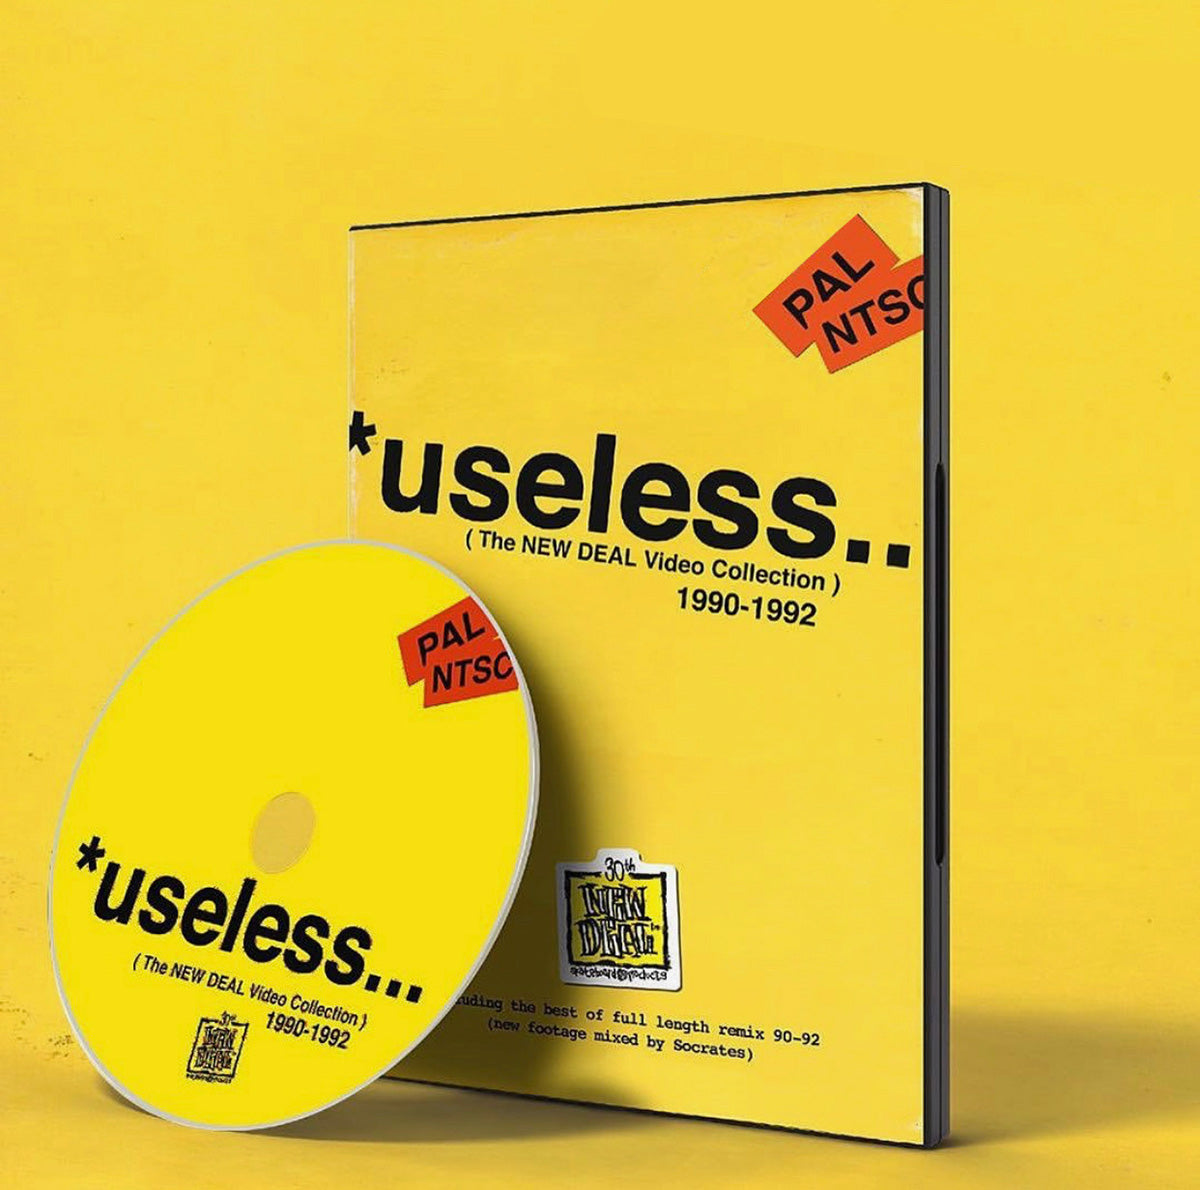 New Deal "Useless" The Video Collection DVD - 1990 to 1992